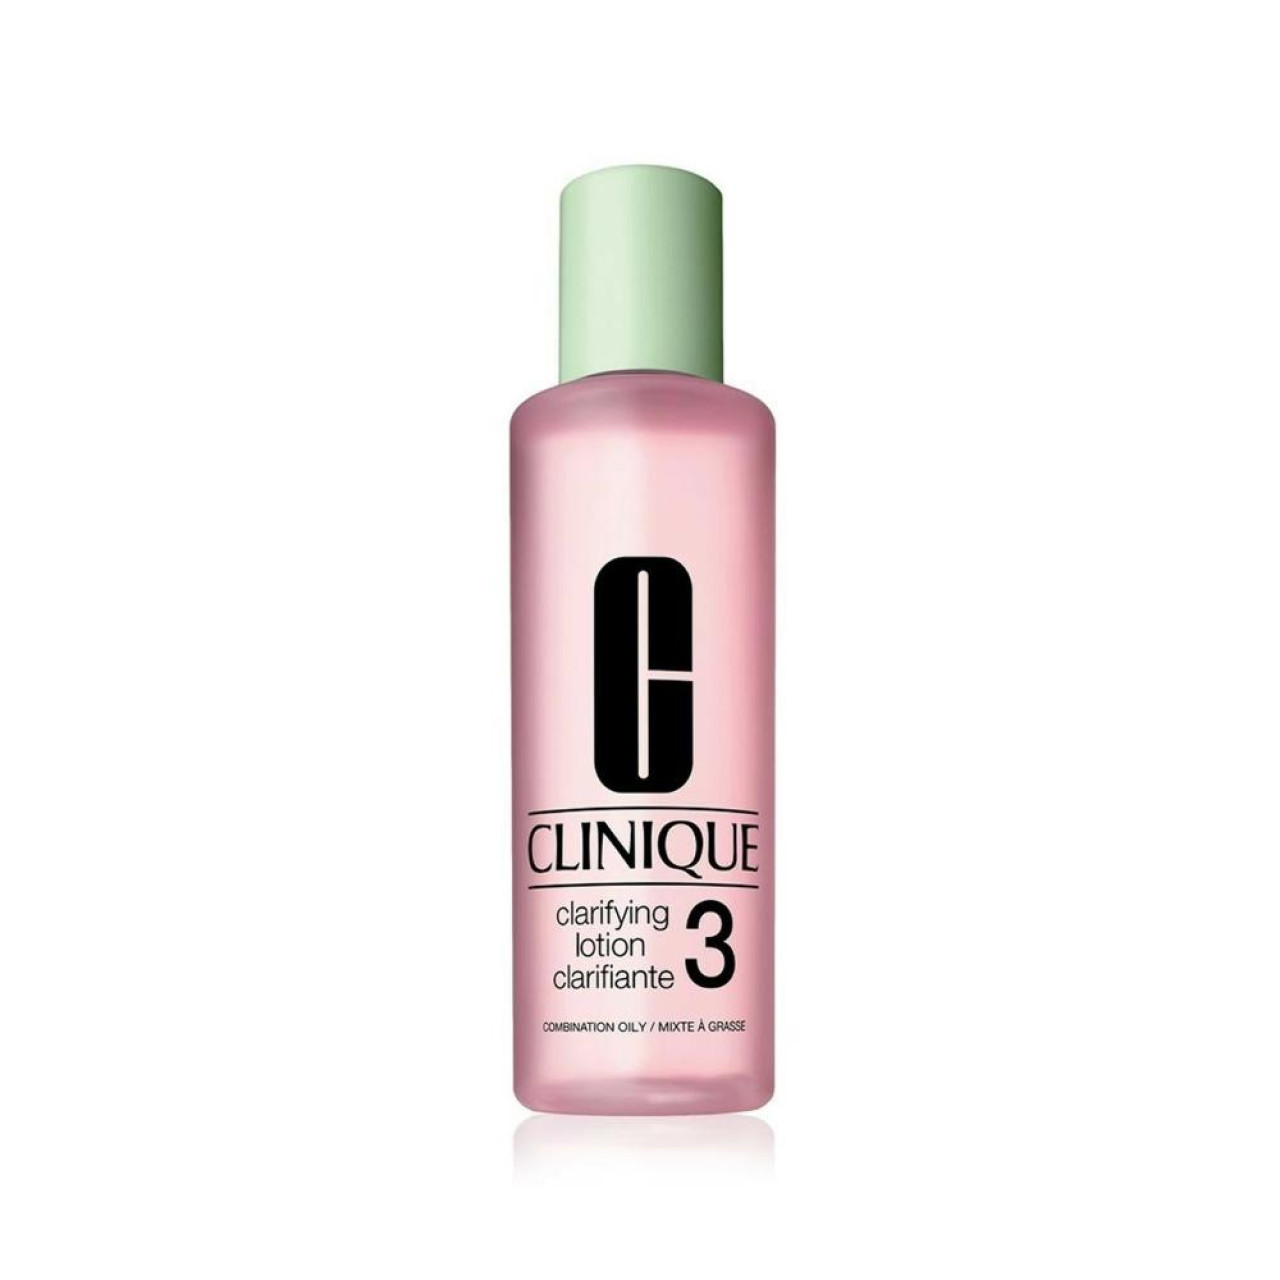 Clinique clarifying lotion 3 400ml